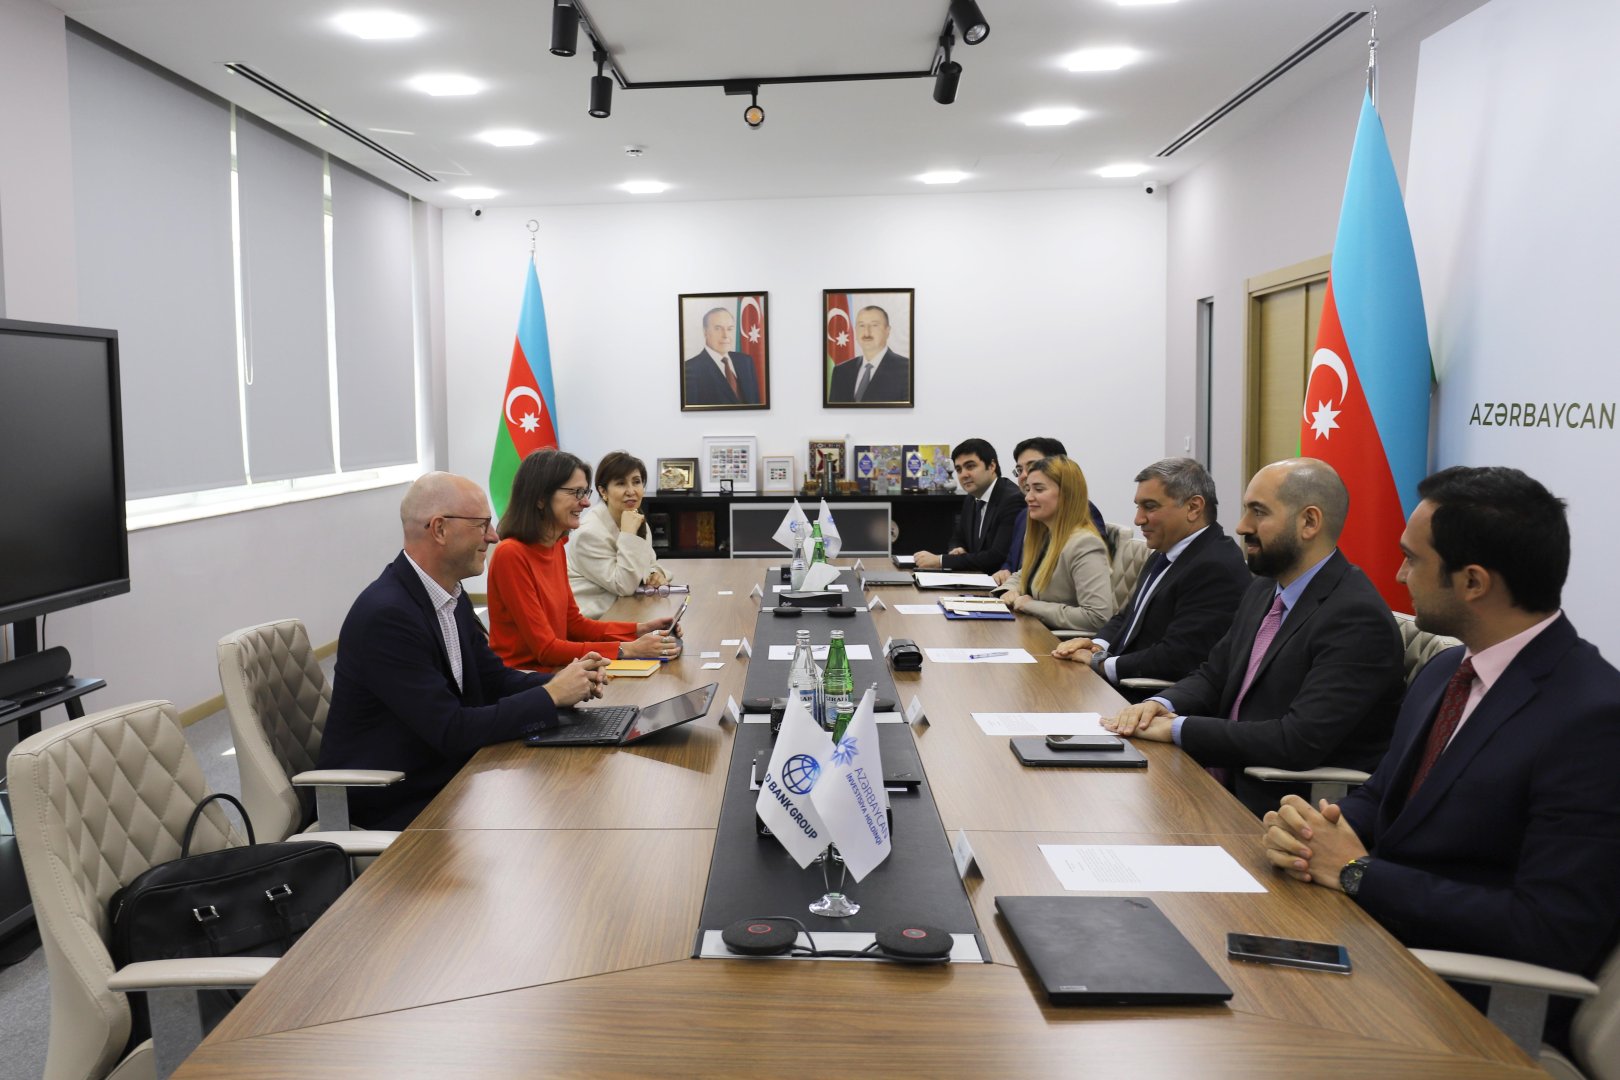 Azerbaijan Investment Holding, WB discuss promising projects